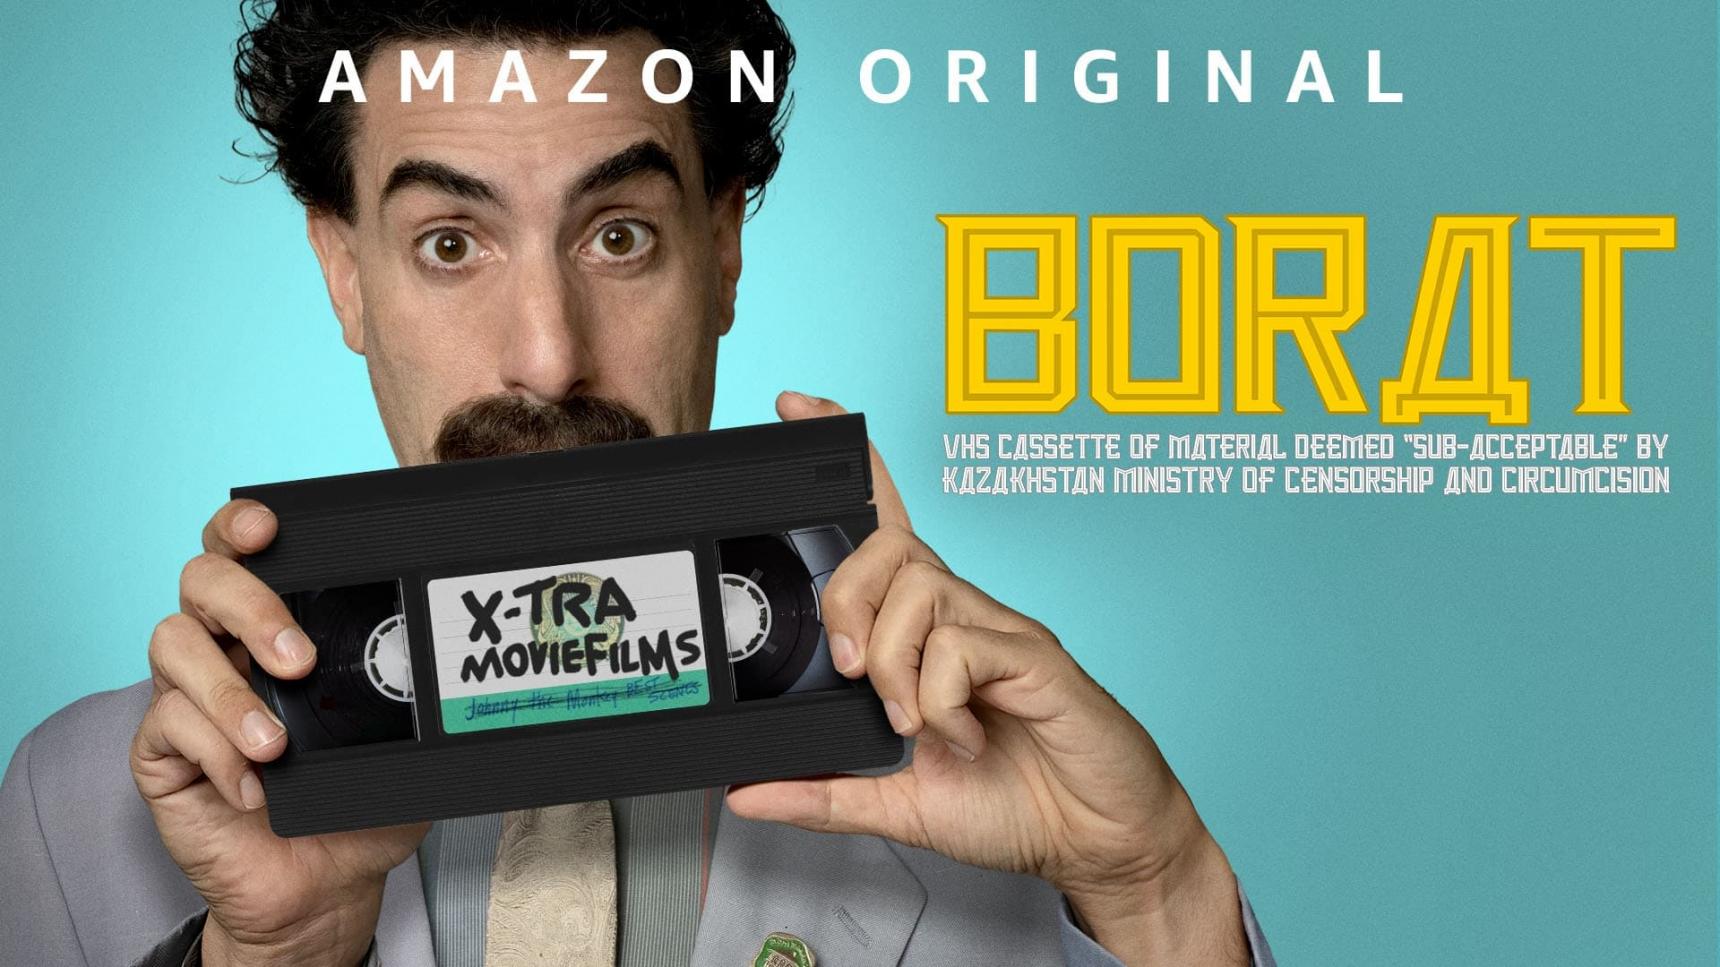 poster de Borat: VHS Cassette of Material Deemed “Sub-acceptable” By Kazakhstan Ministry of Censorship and Circumcision